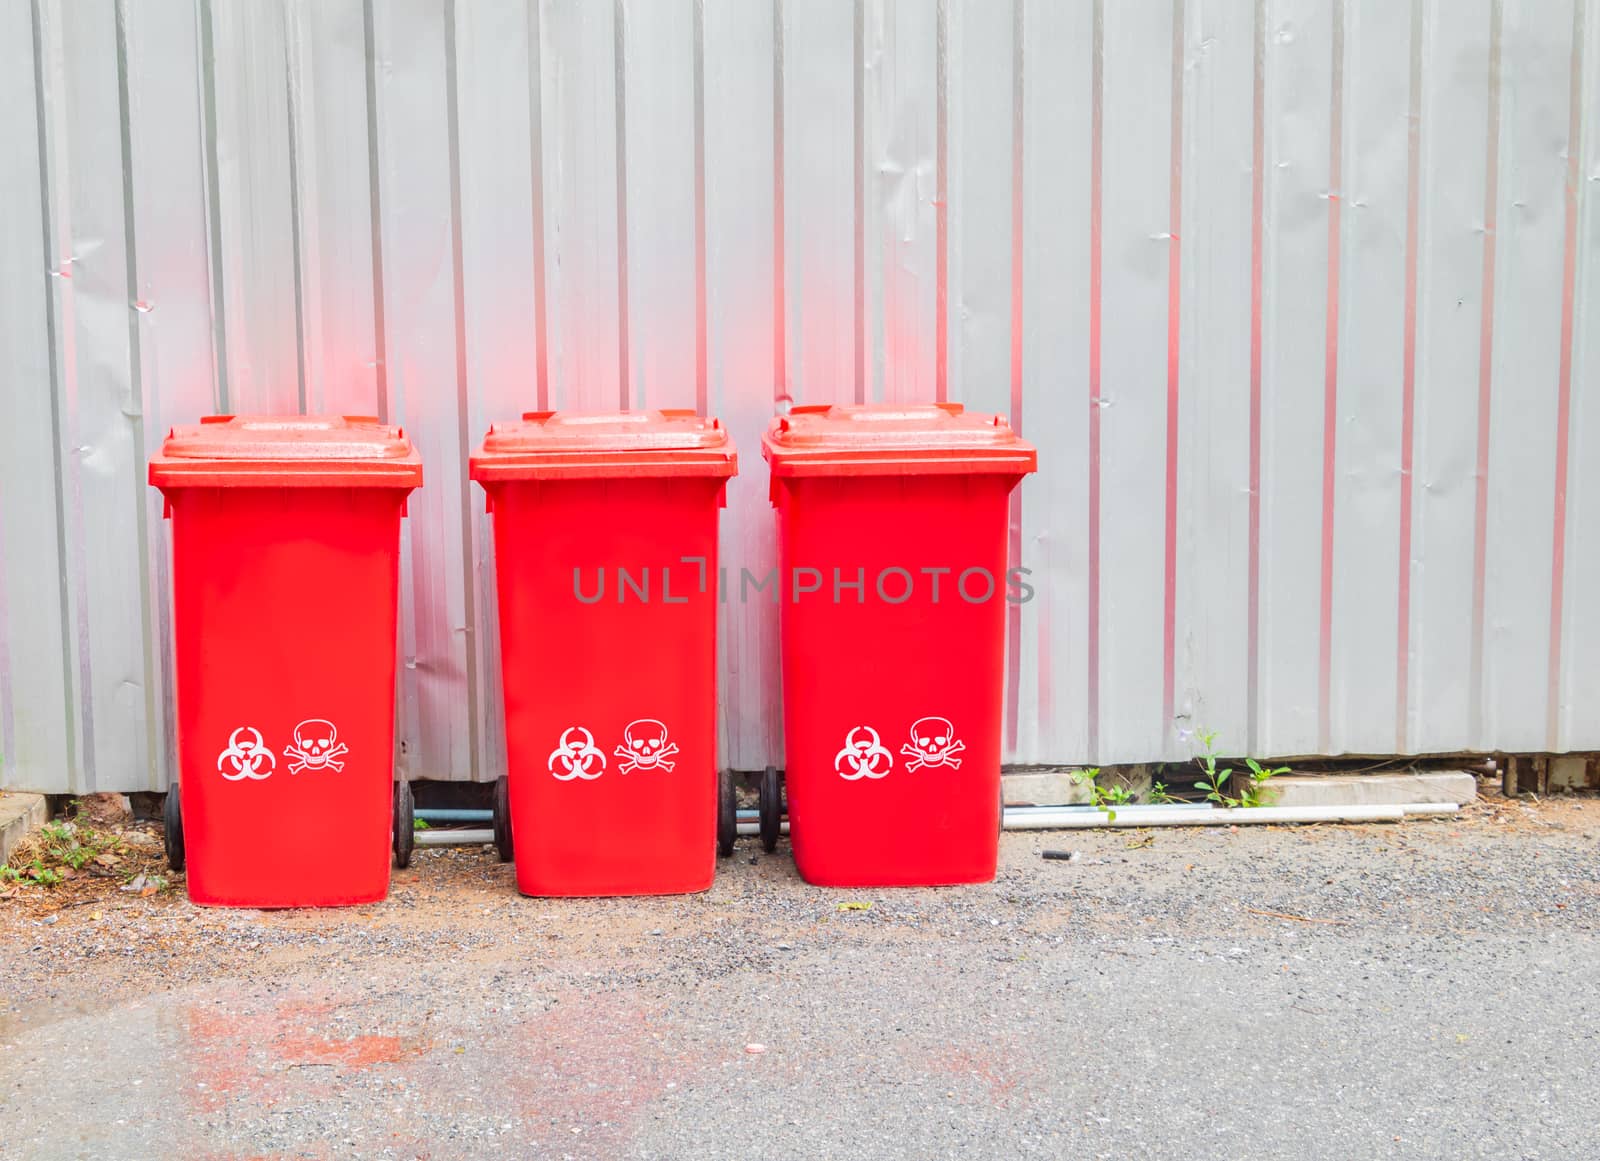 red bins three with symbol infectious in the outdoors keep clean from germs virus. concept prevent garbage infection coronavirus (covid-19)